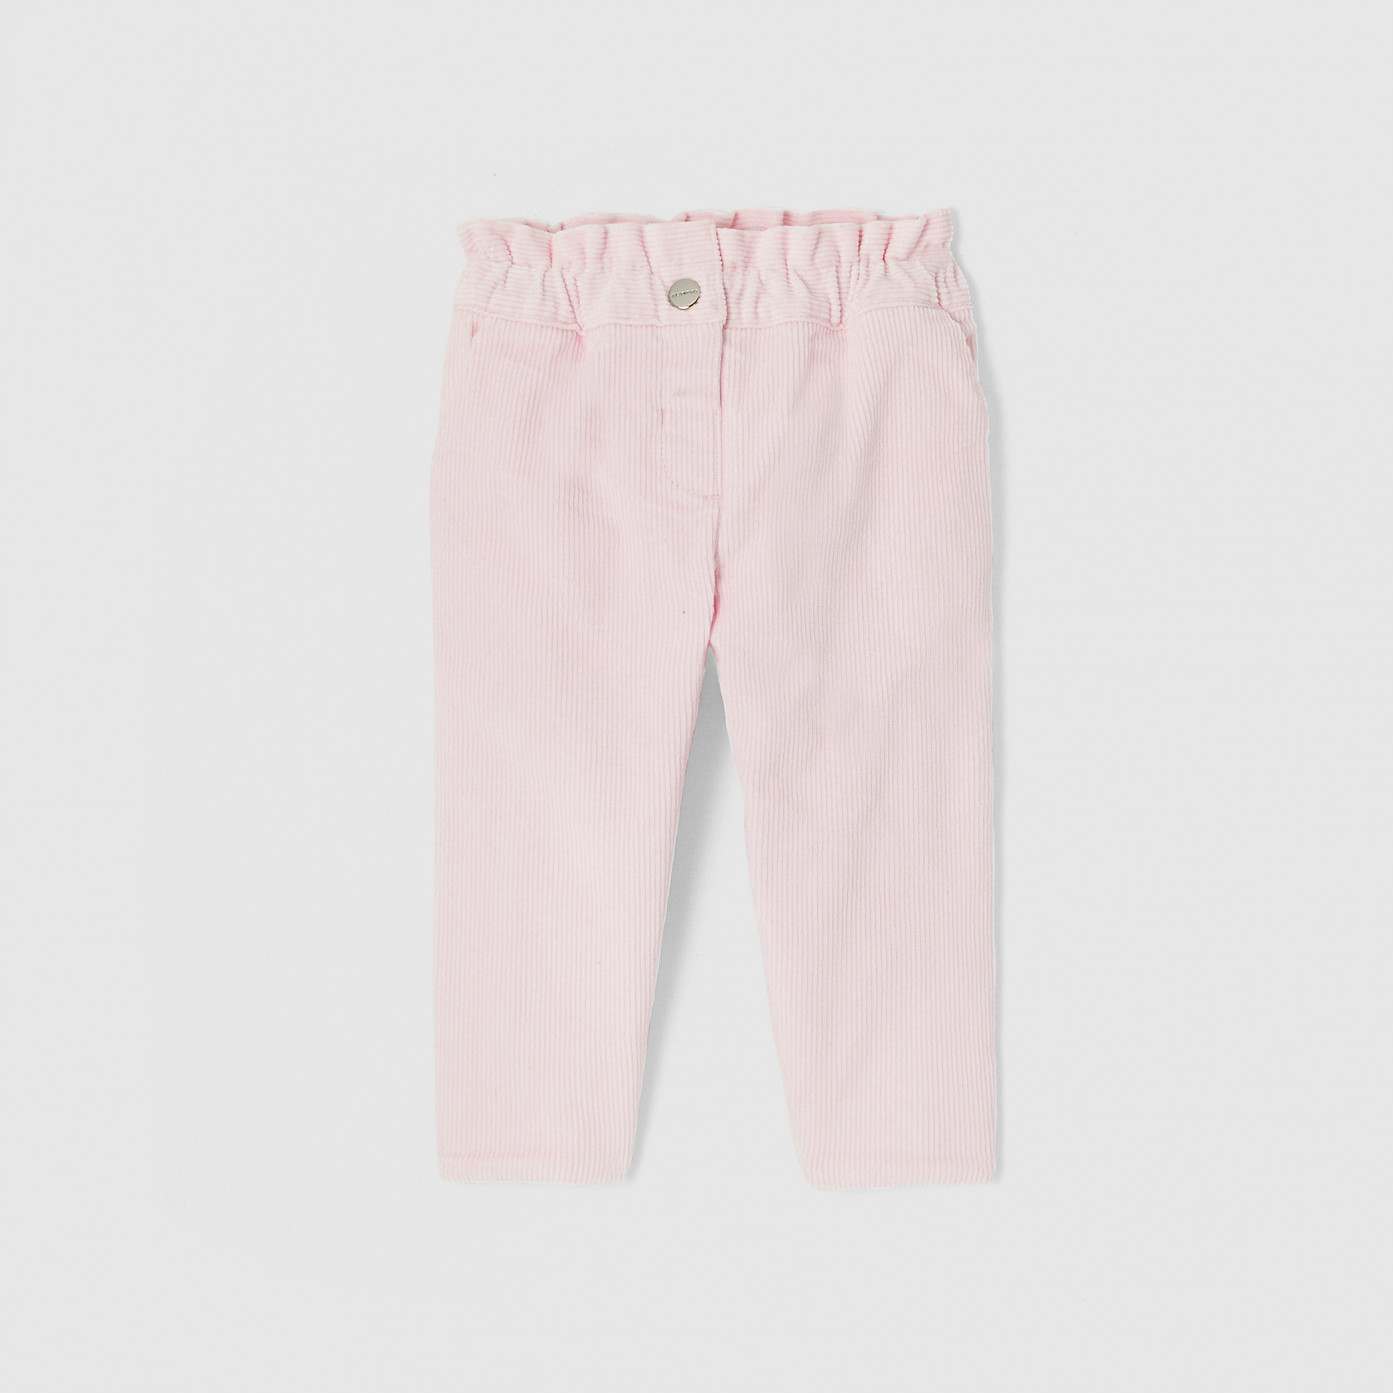 Baby girl carrot trousers